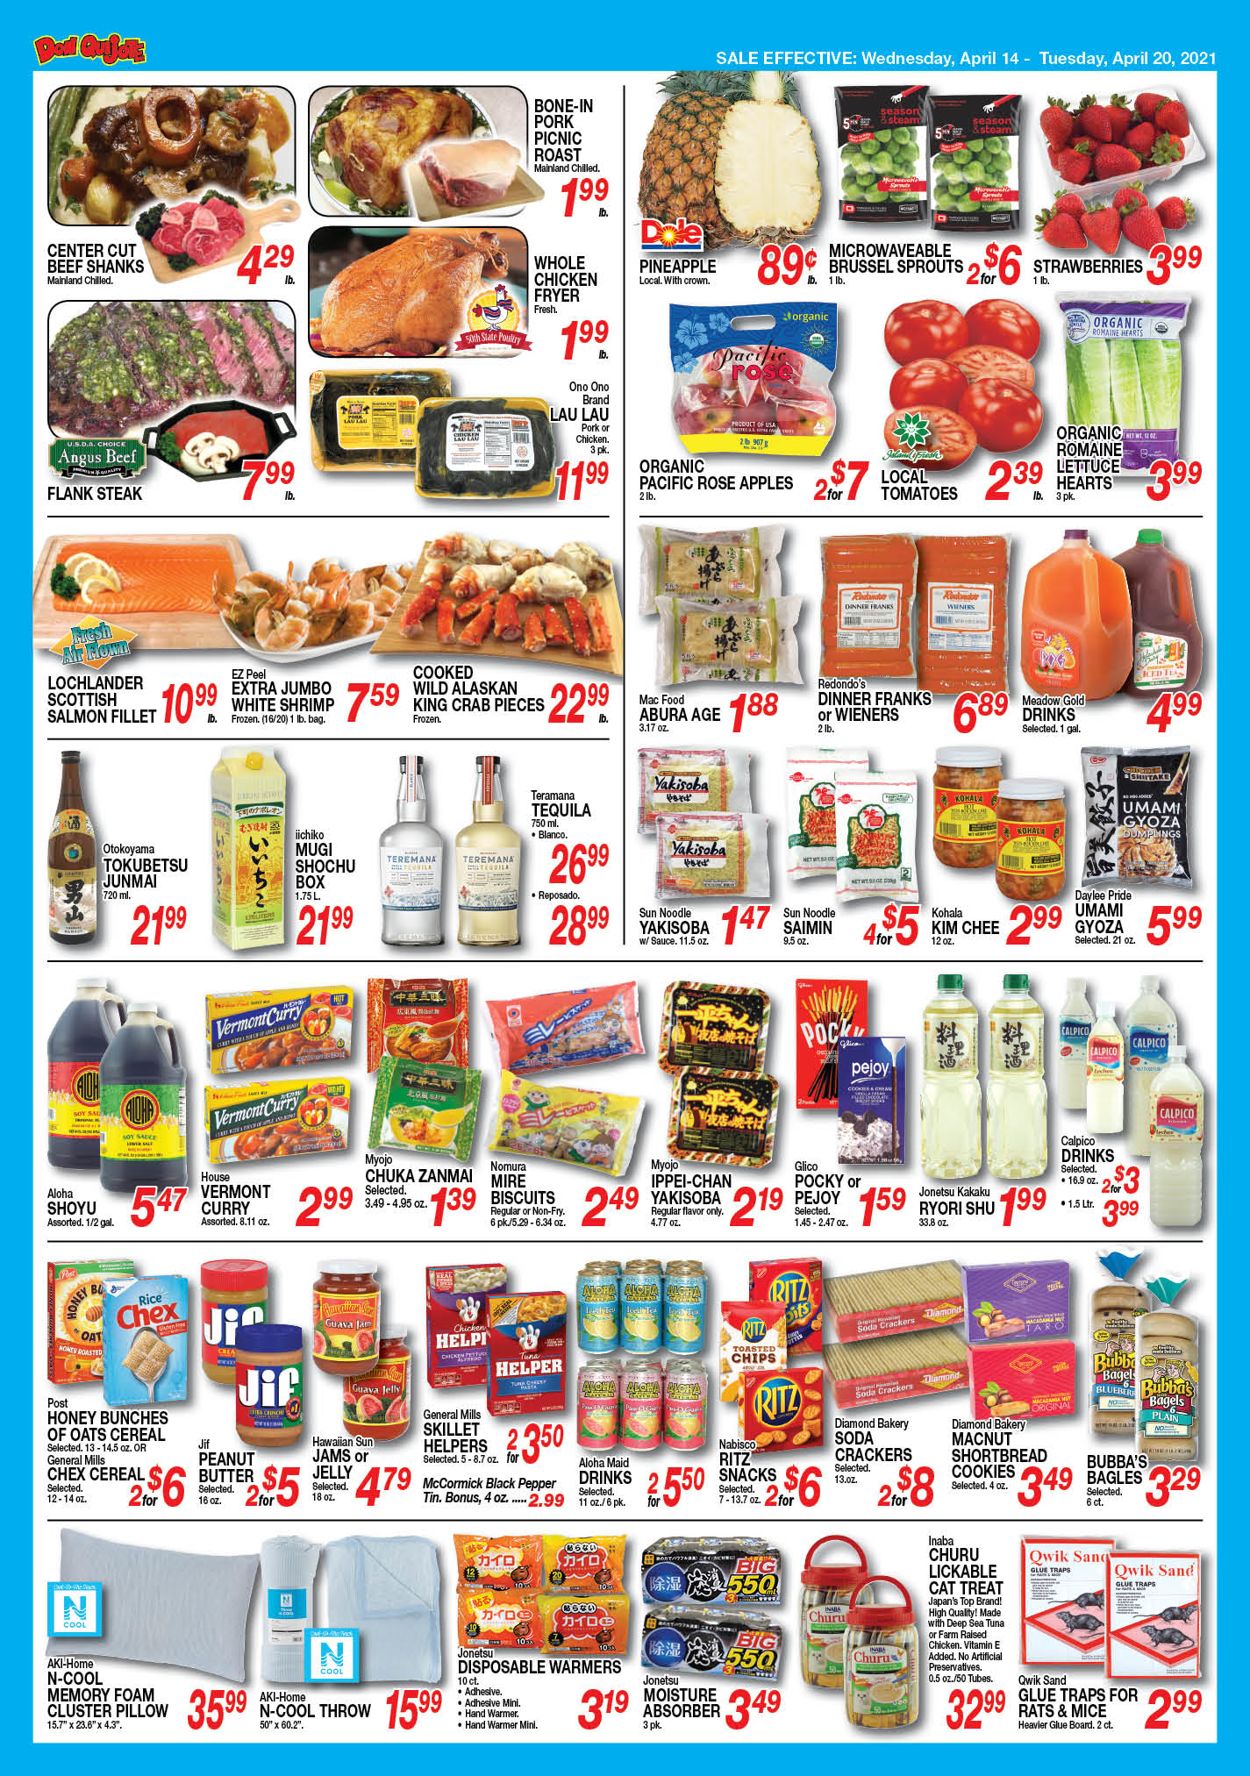 Catalogue Don Quijote Hawaii from 04/14/2021